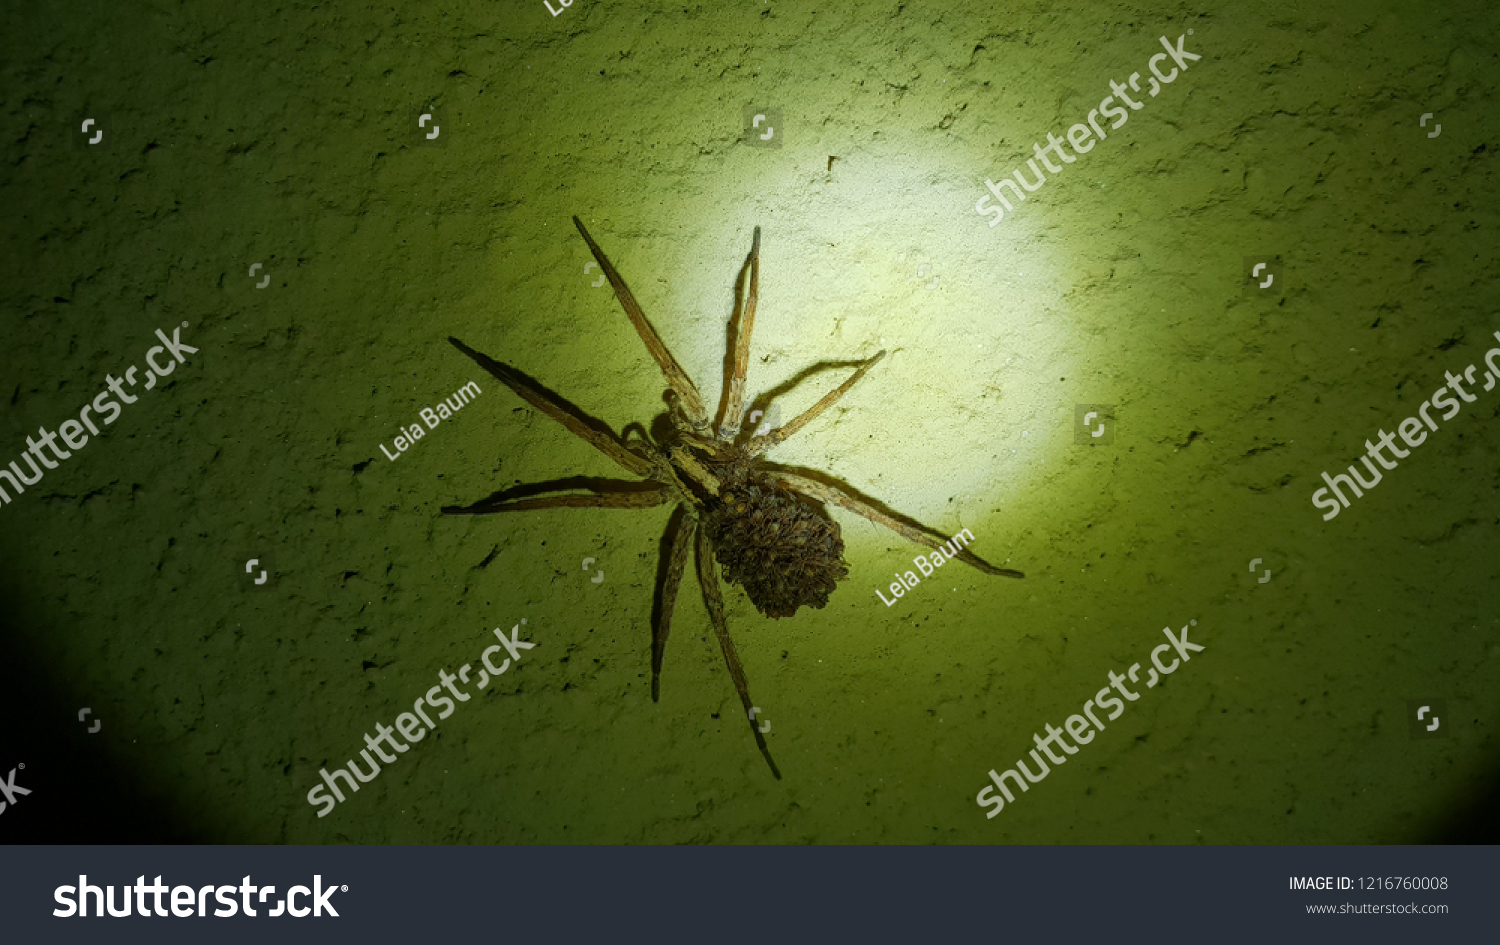 A spider and her offspring on her body #1216760008